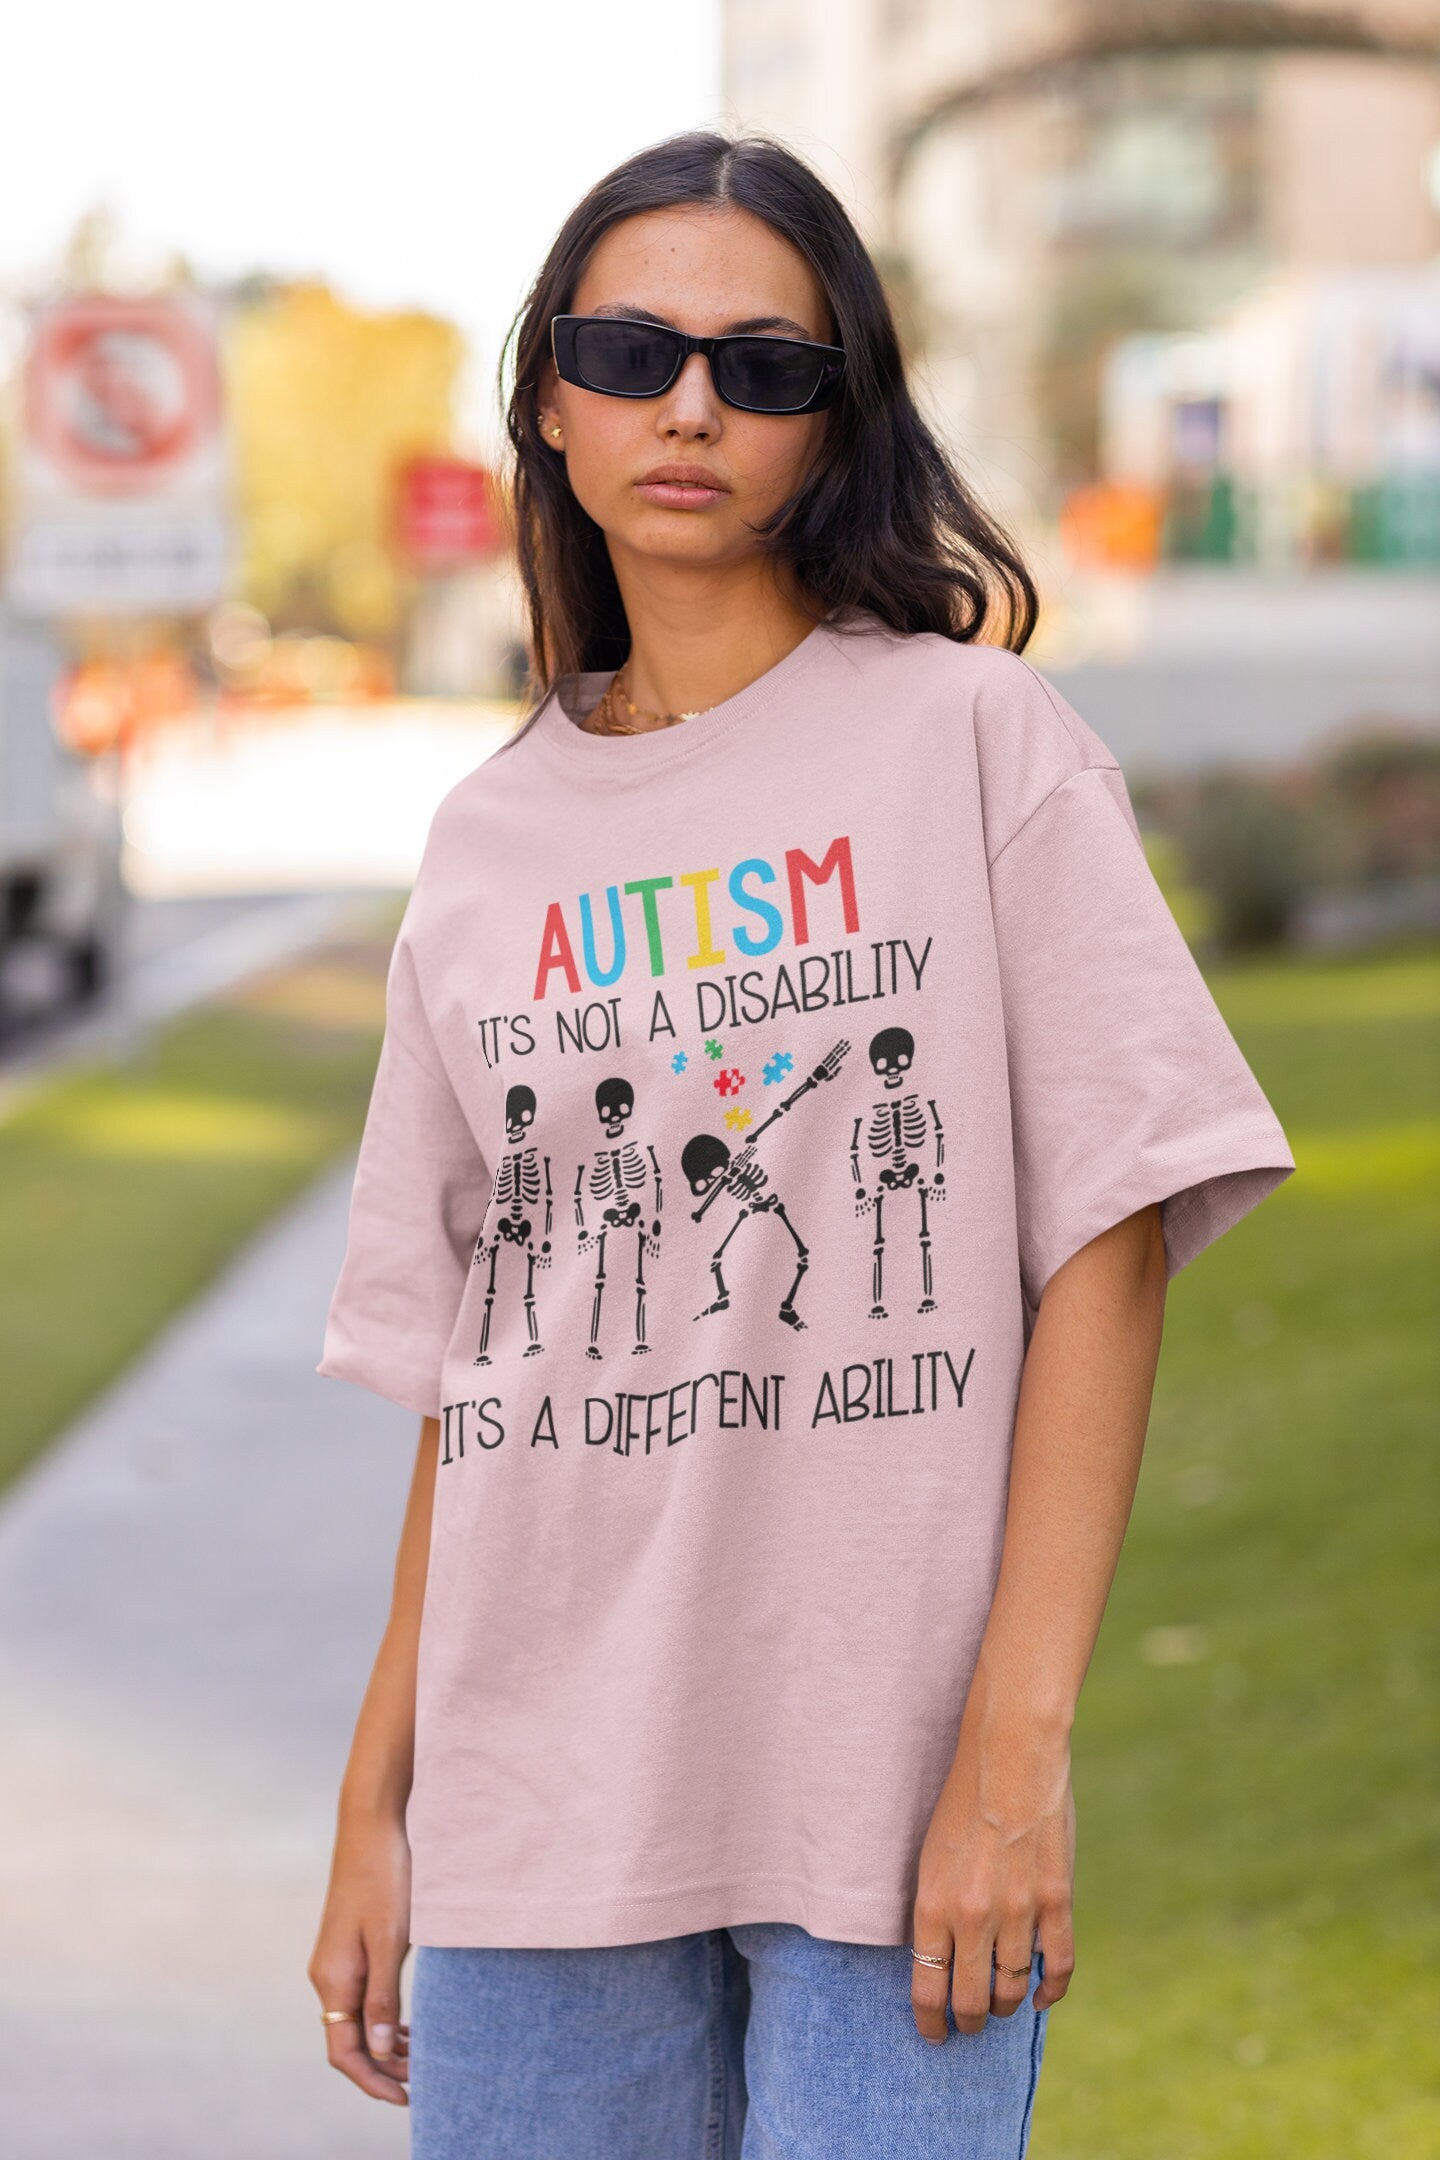 Autism - It's not a Disability - It's a Different Ability Youth Short Sleeve Tee